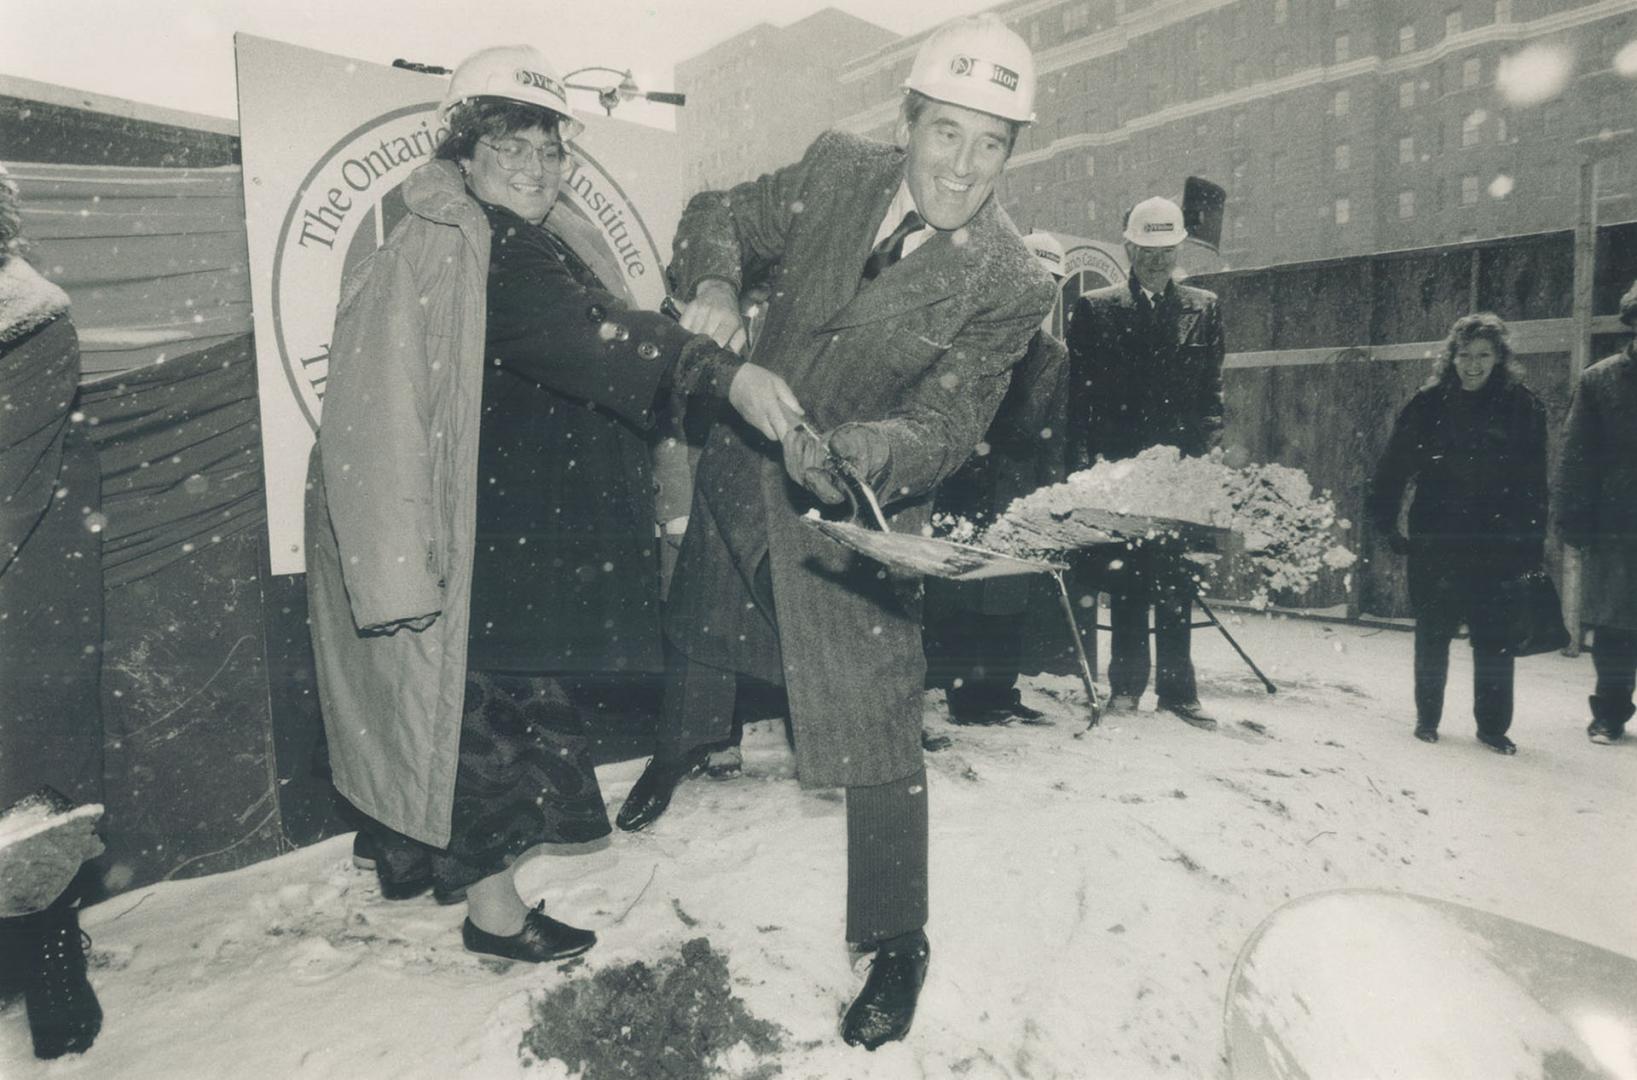 Digging in for health's sake: Ken Clarke, chairman of Princess Margaret Hospital, gives a heave of the shovel under the watchful eye of Ontario Health Minister Elinor Caplan at ground-breaking ceremonies yesterday for the new hospital on University Ave.